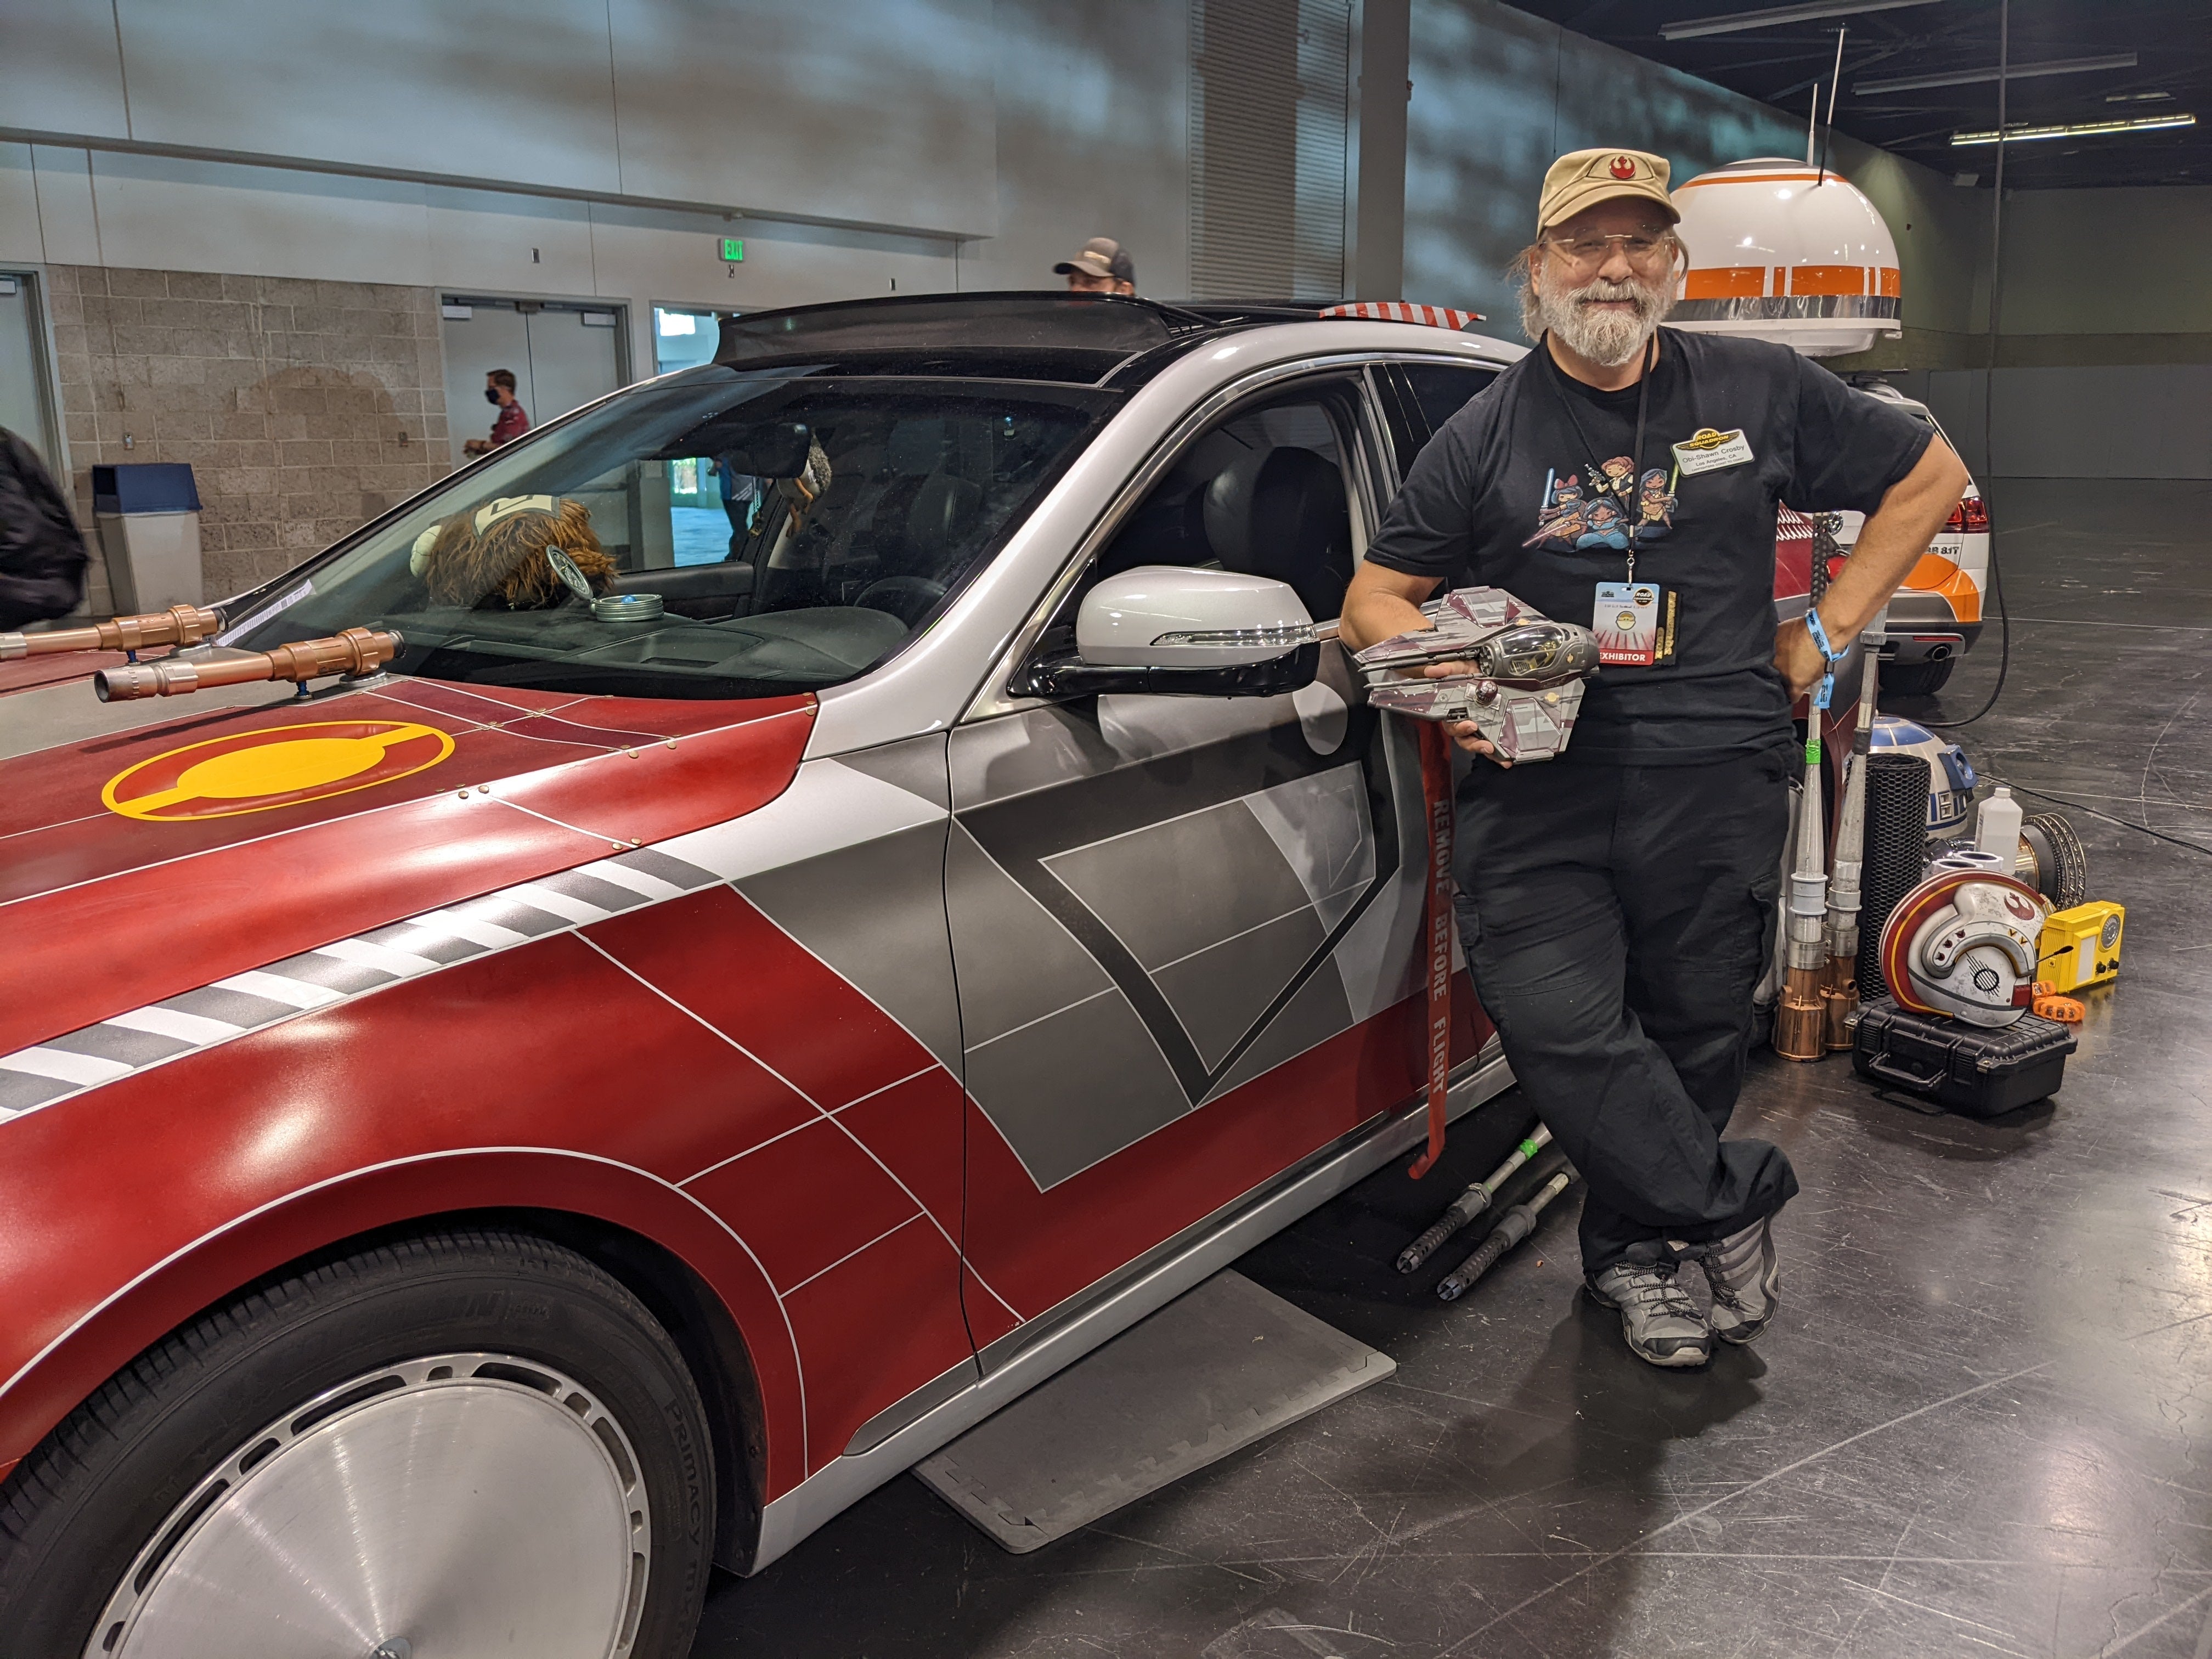 Shawn Crosby with his car decorated as Han Solo's Starfighter